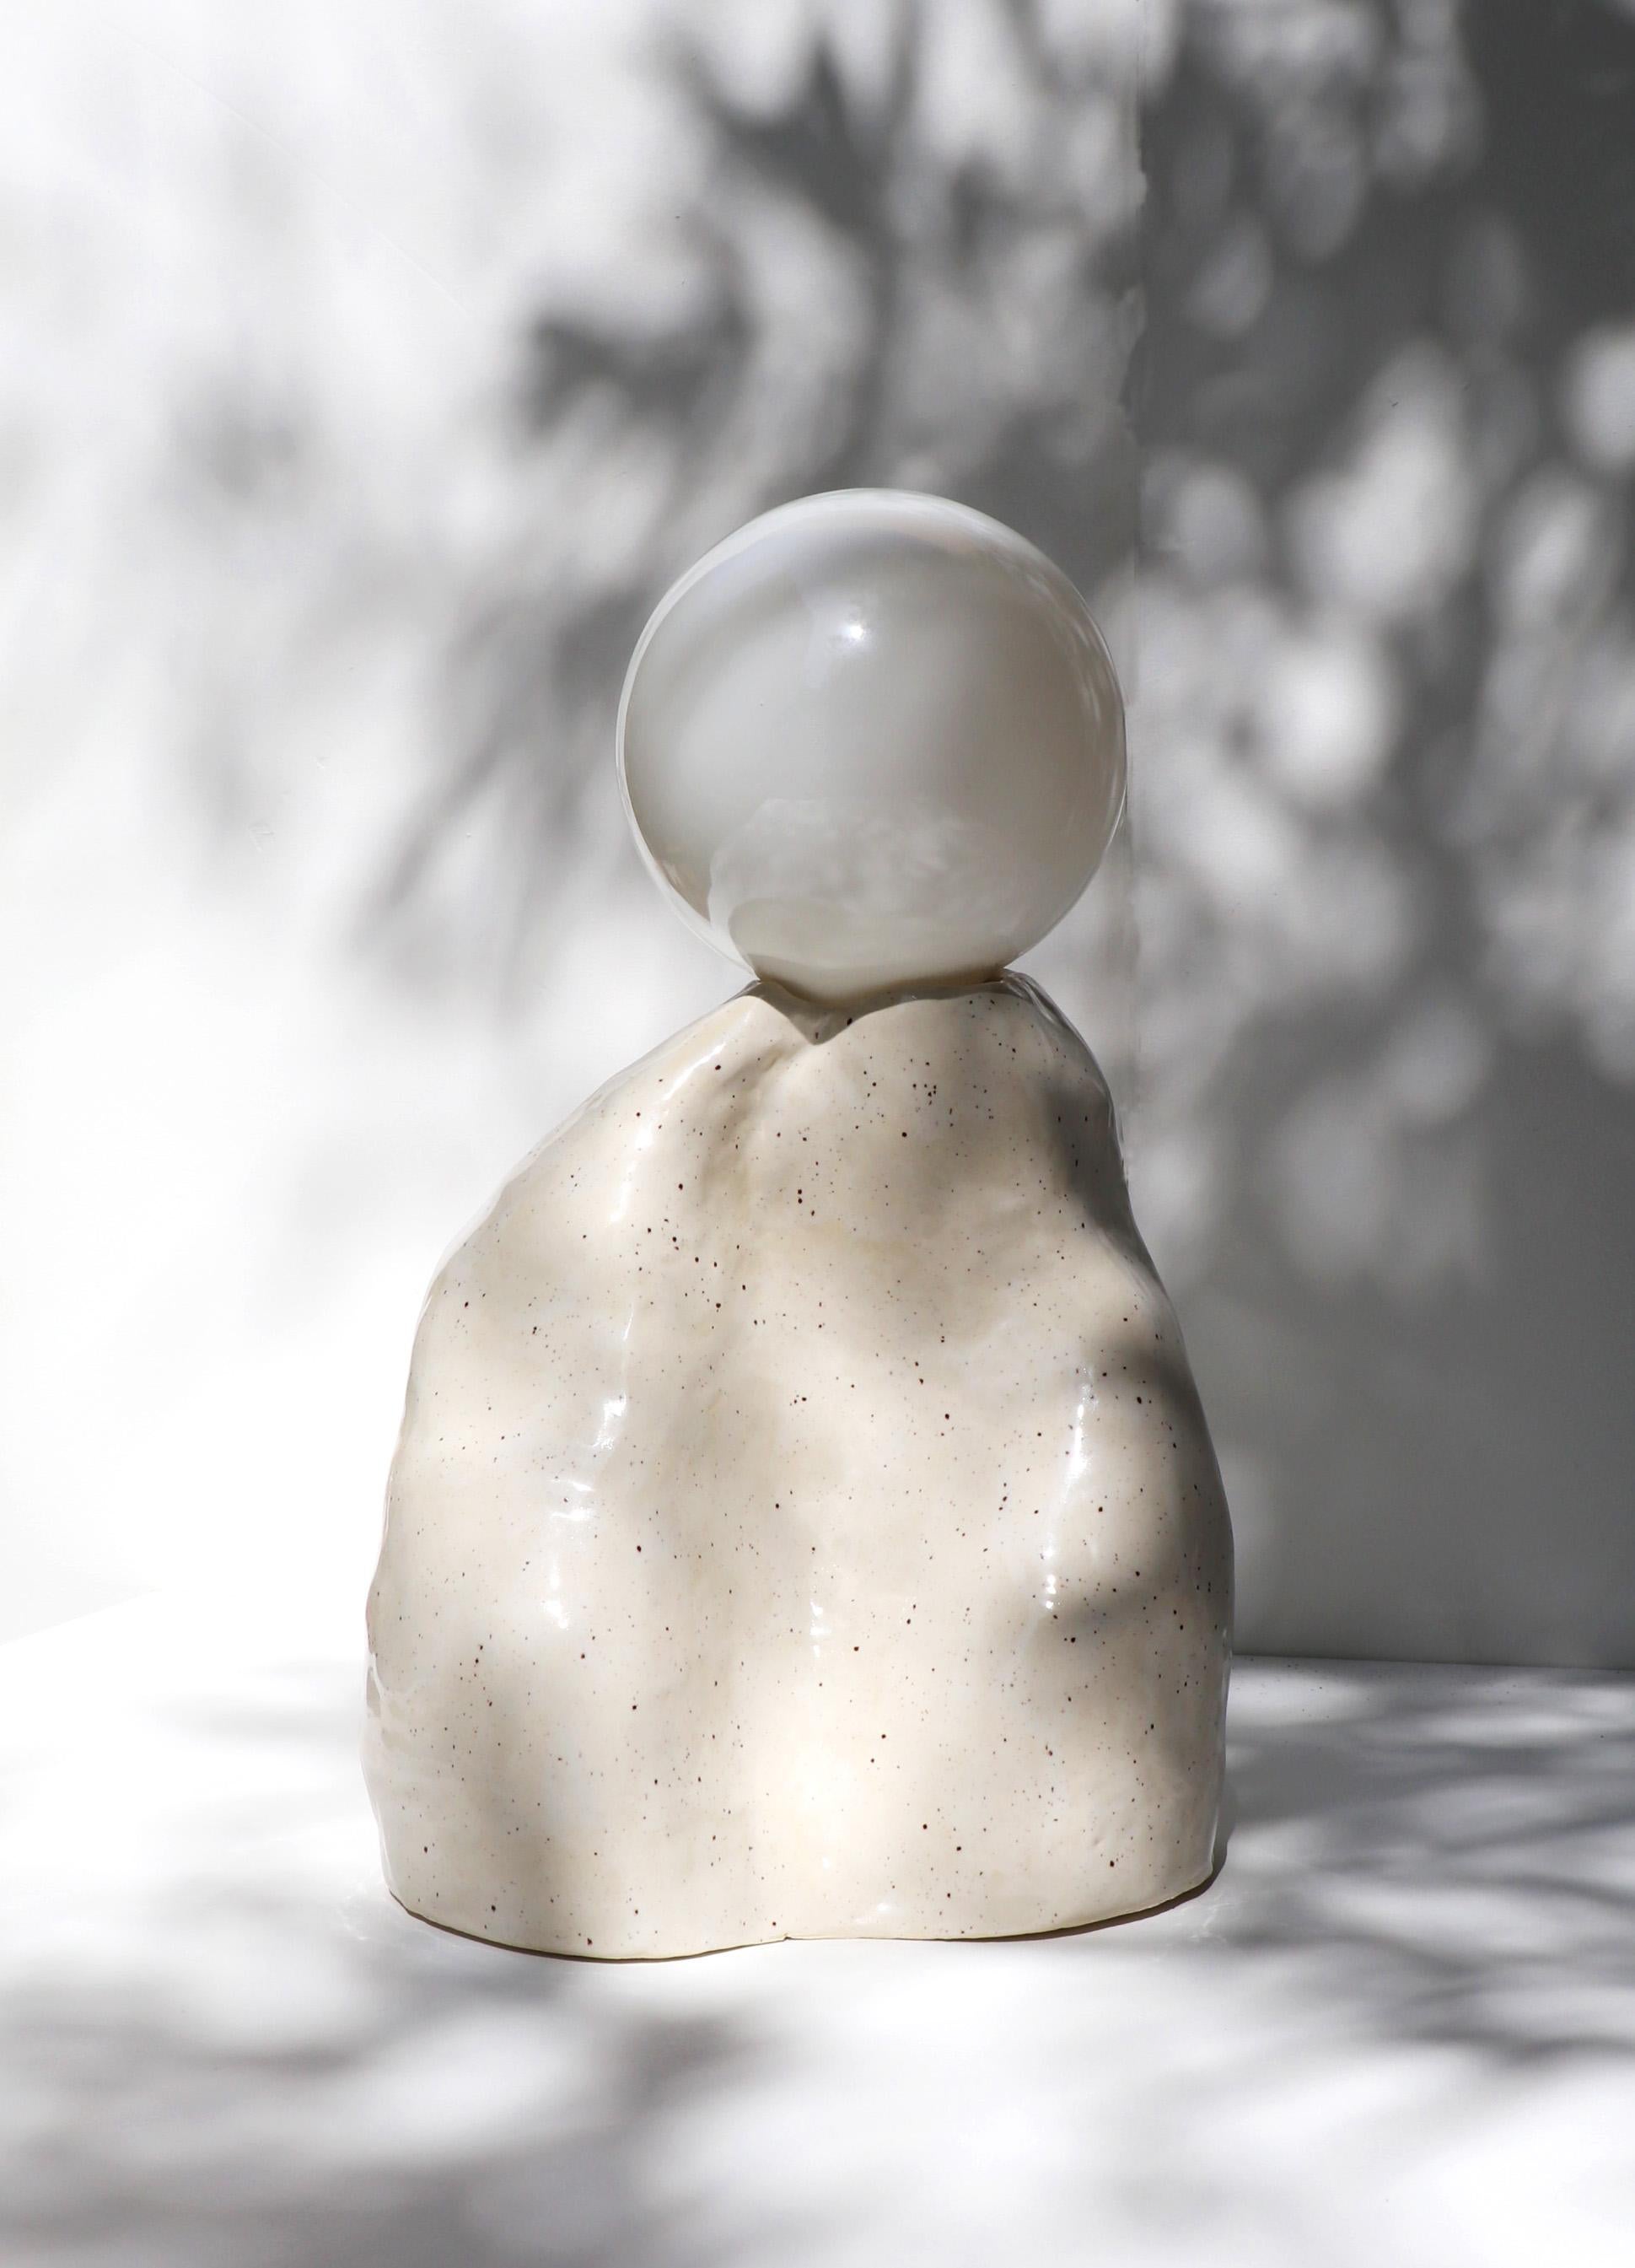 Gloria Lamp by Alice Lahana Studio
Dimensions: W 20 x D 13.5 x H 35 cm
Materials: Stoneware.

The Gloria lamp is handcrafted in the studio workshops. With its organic and abstract shape, the Gloria lamp oscillates between object and sculpture. It is